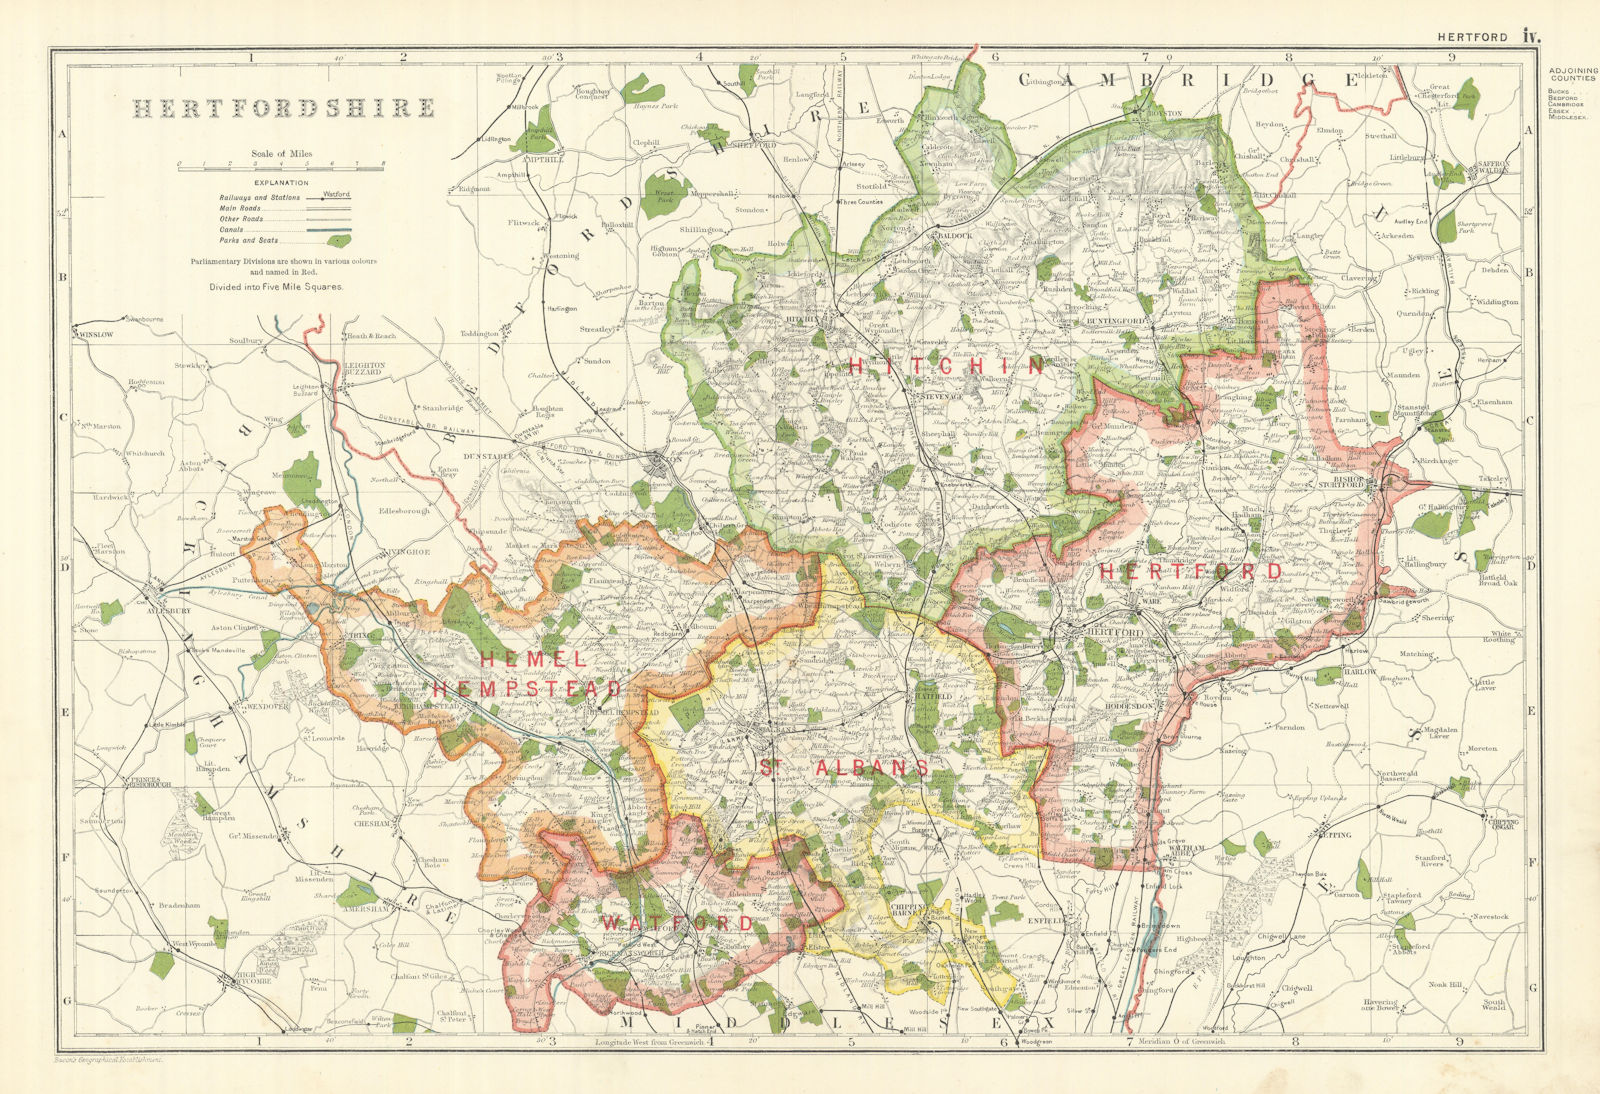 HERTFORDSHIRE. Showing Parliamentary divisions, boroughs & parks. BACON 1919 map